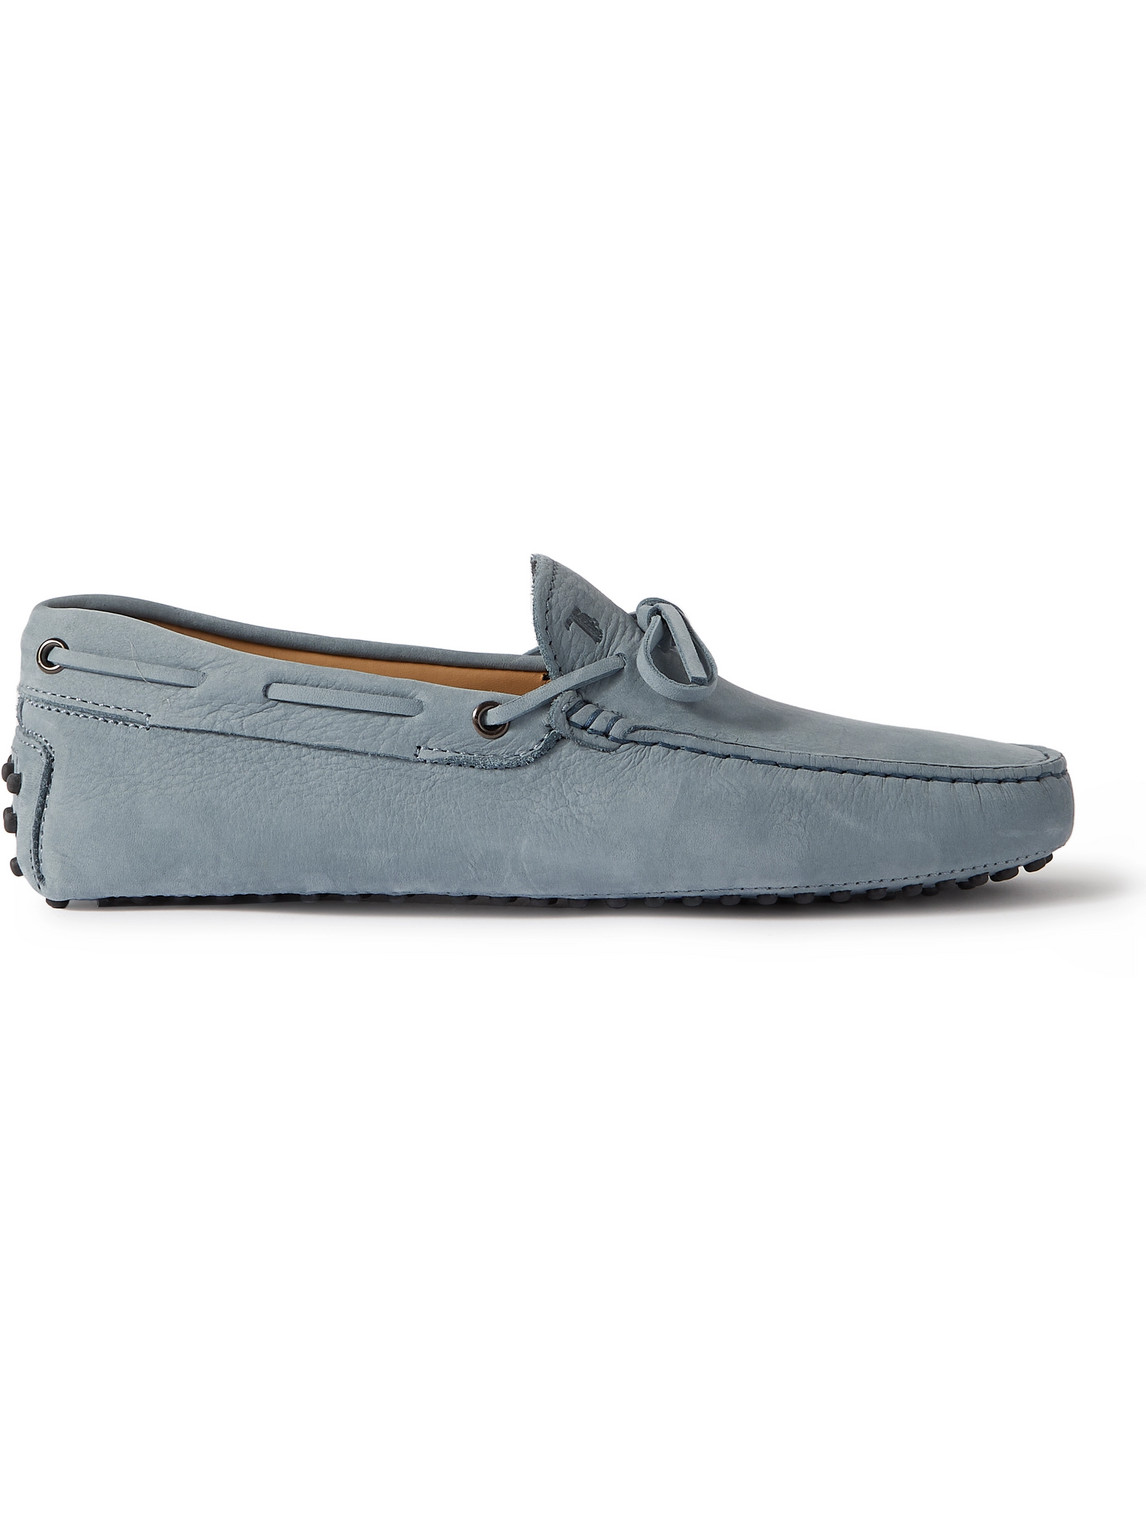 TOD'S GOMMINO SUEDE DRIVING SHOES